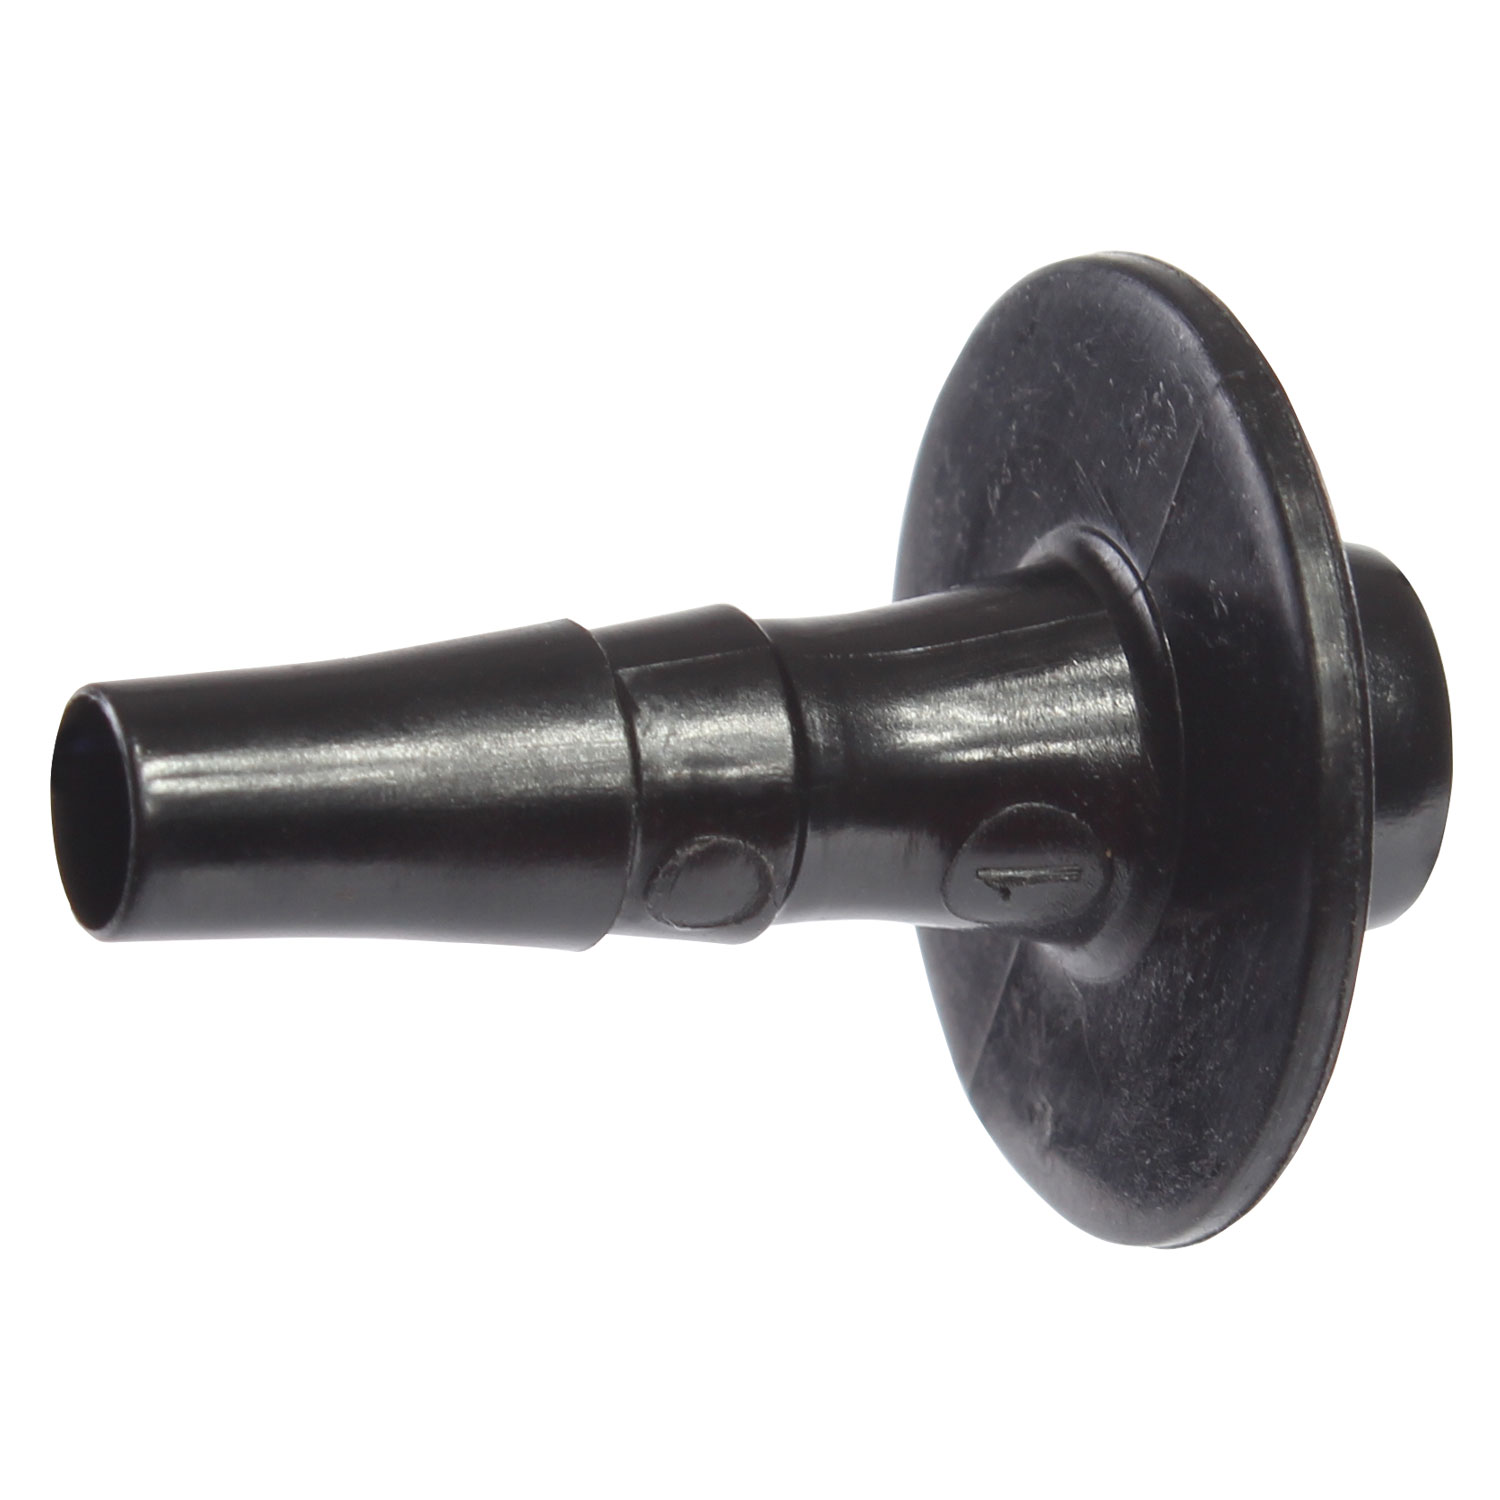 Straight saddle Connector for 3/16" tubing